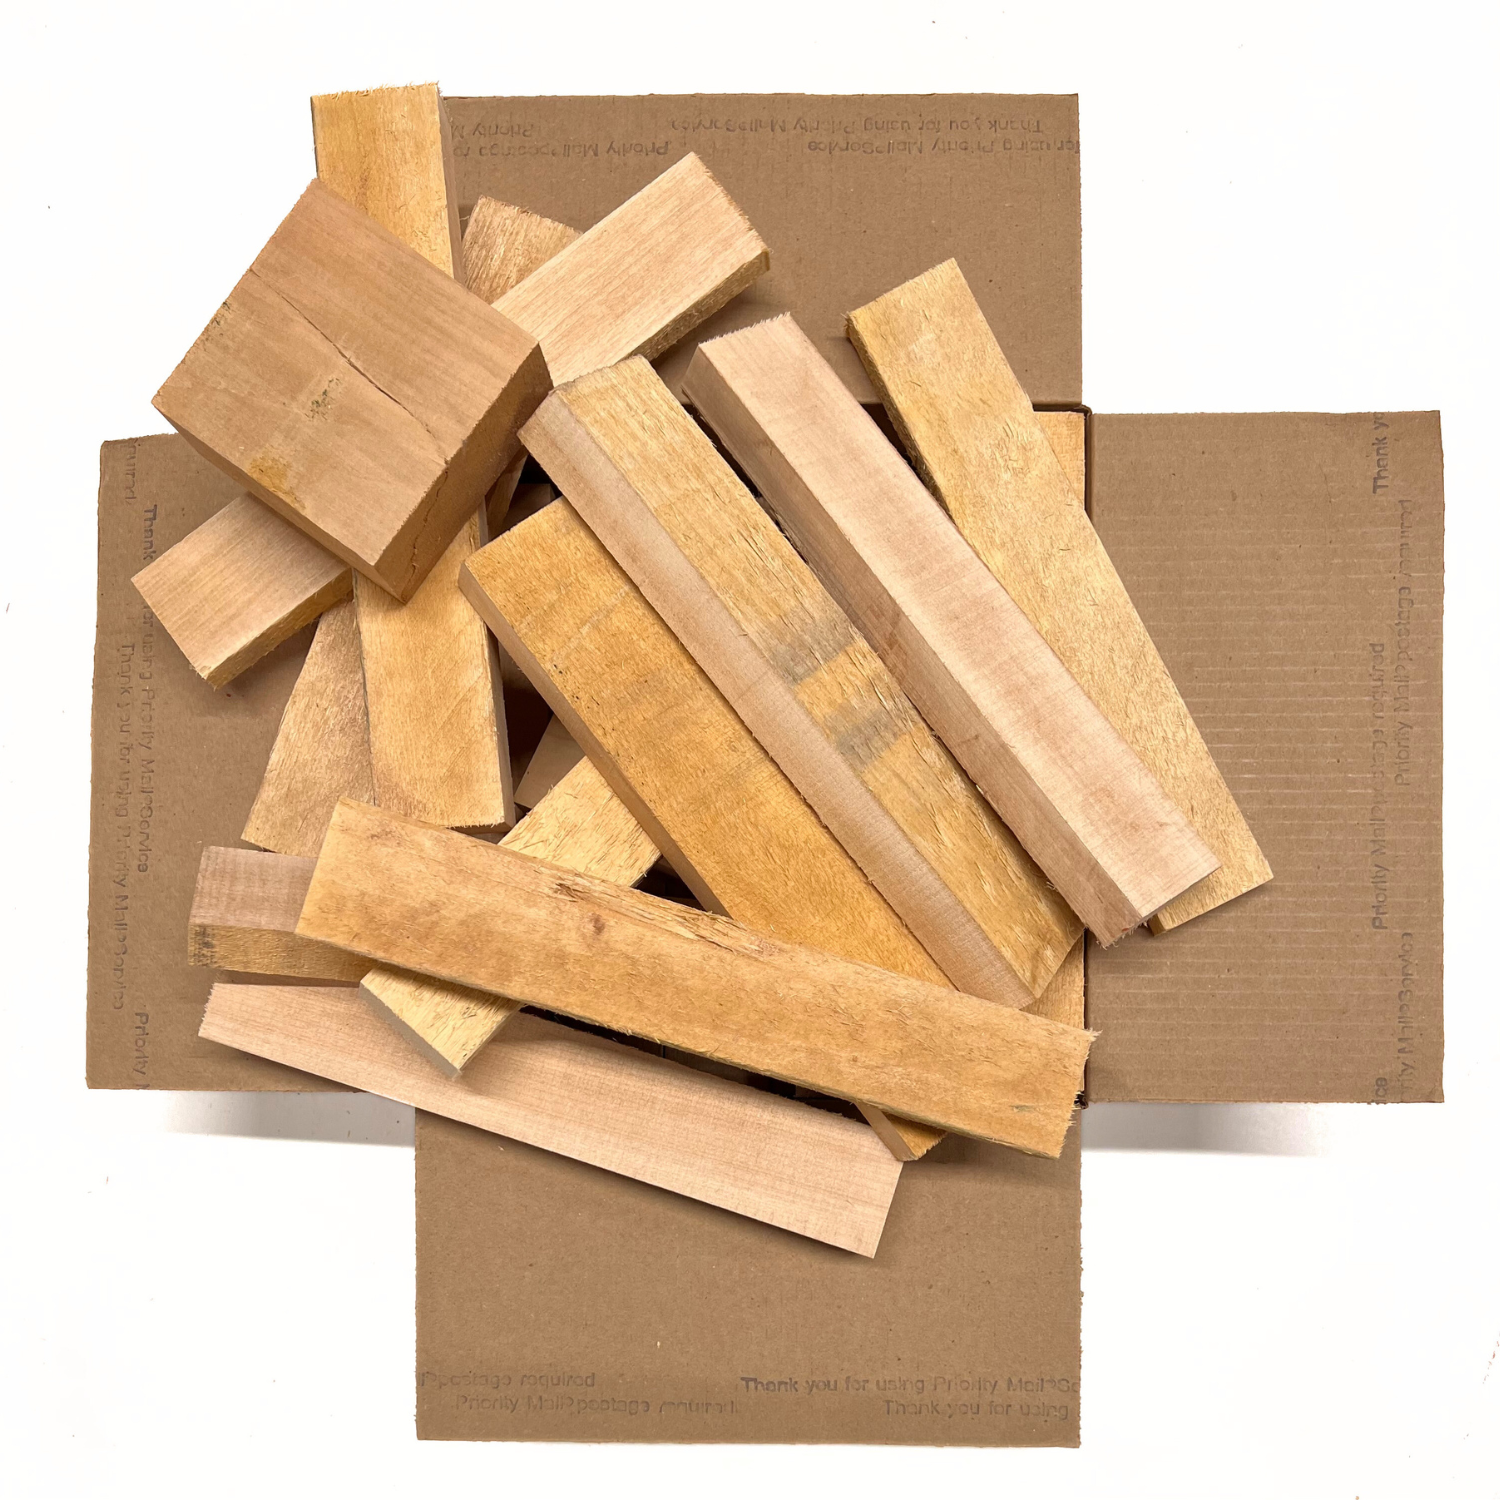 Basswood Lumber for Woodworkers - Friendly Service & Fast Shipping